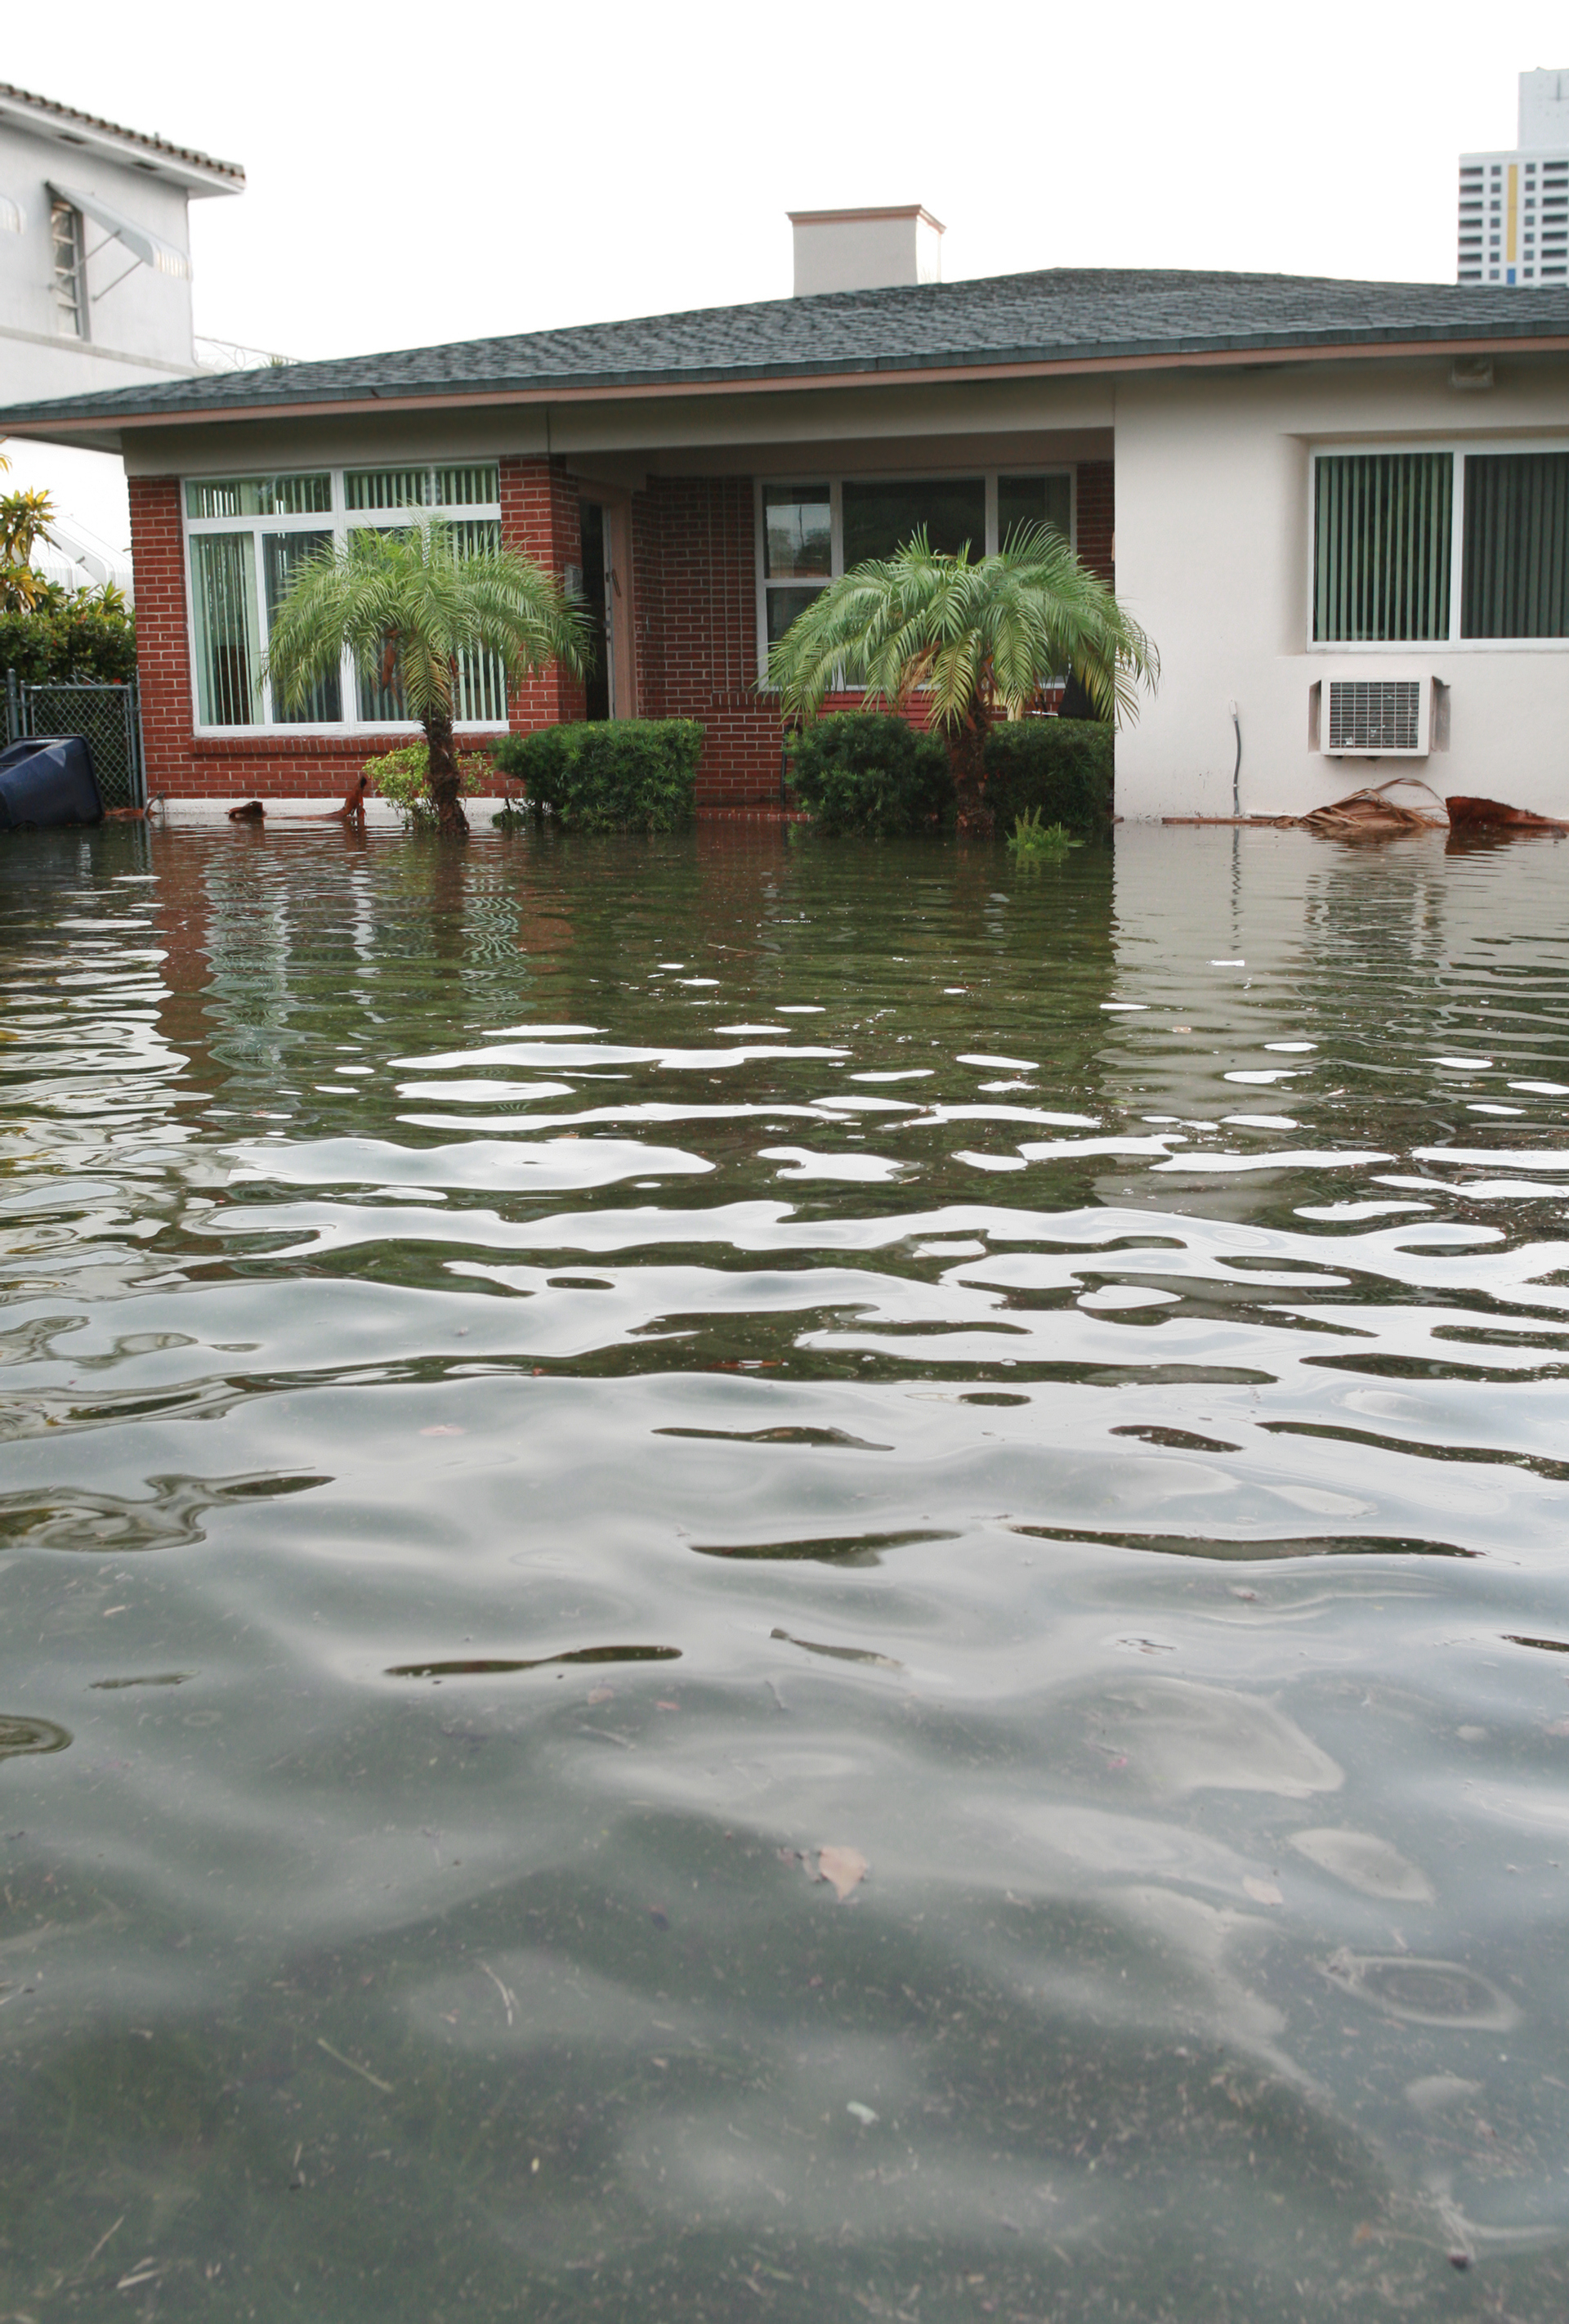 A flooded residential area with water reaching halfway up the front yard of a house